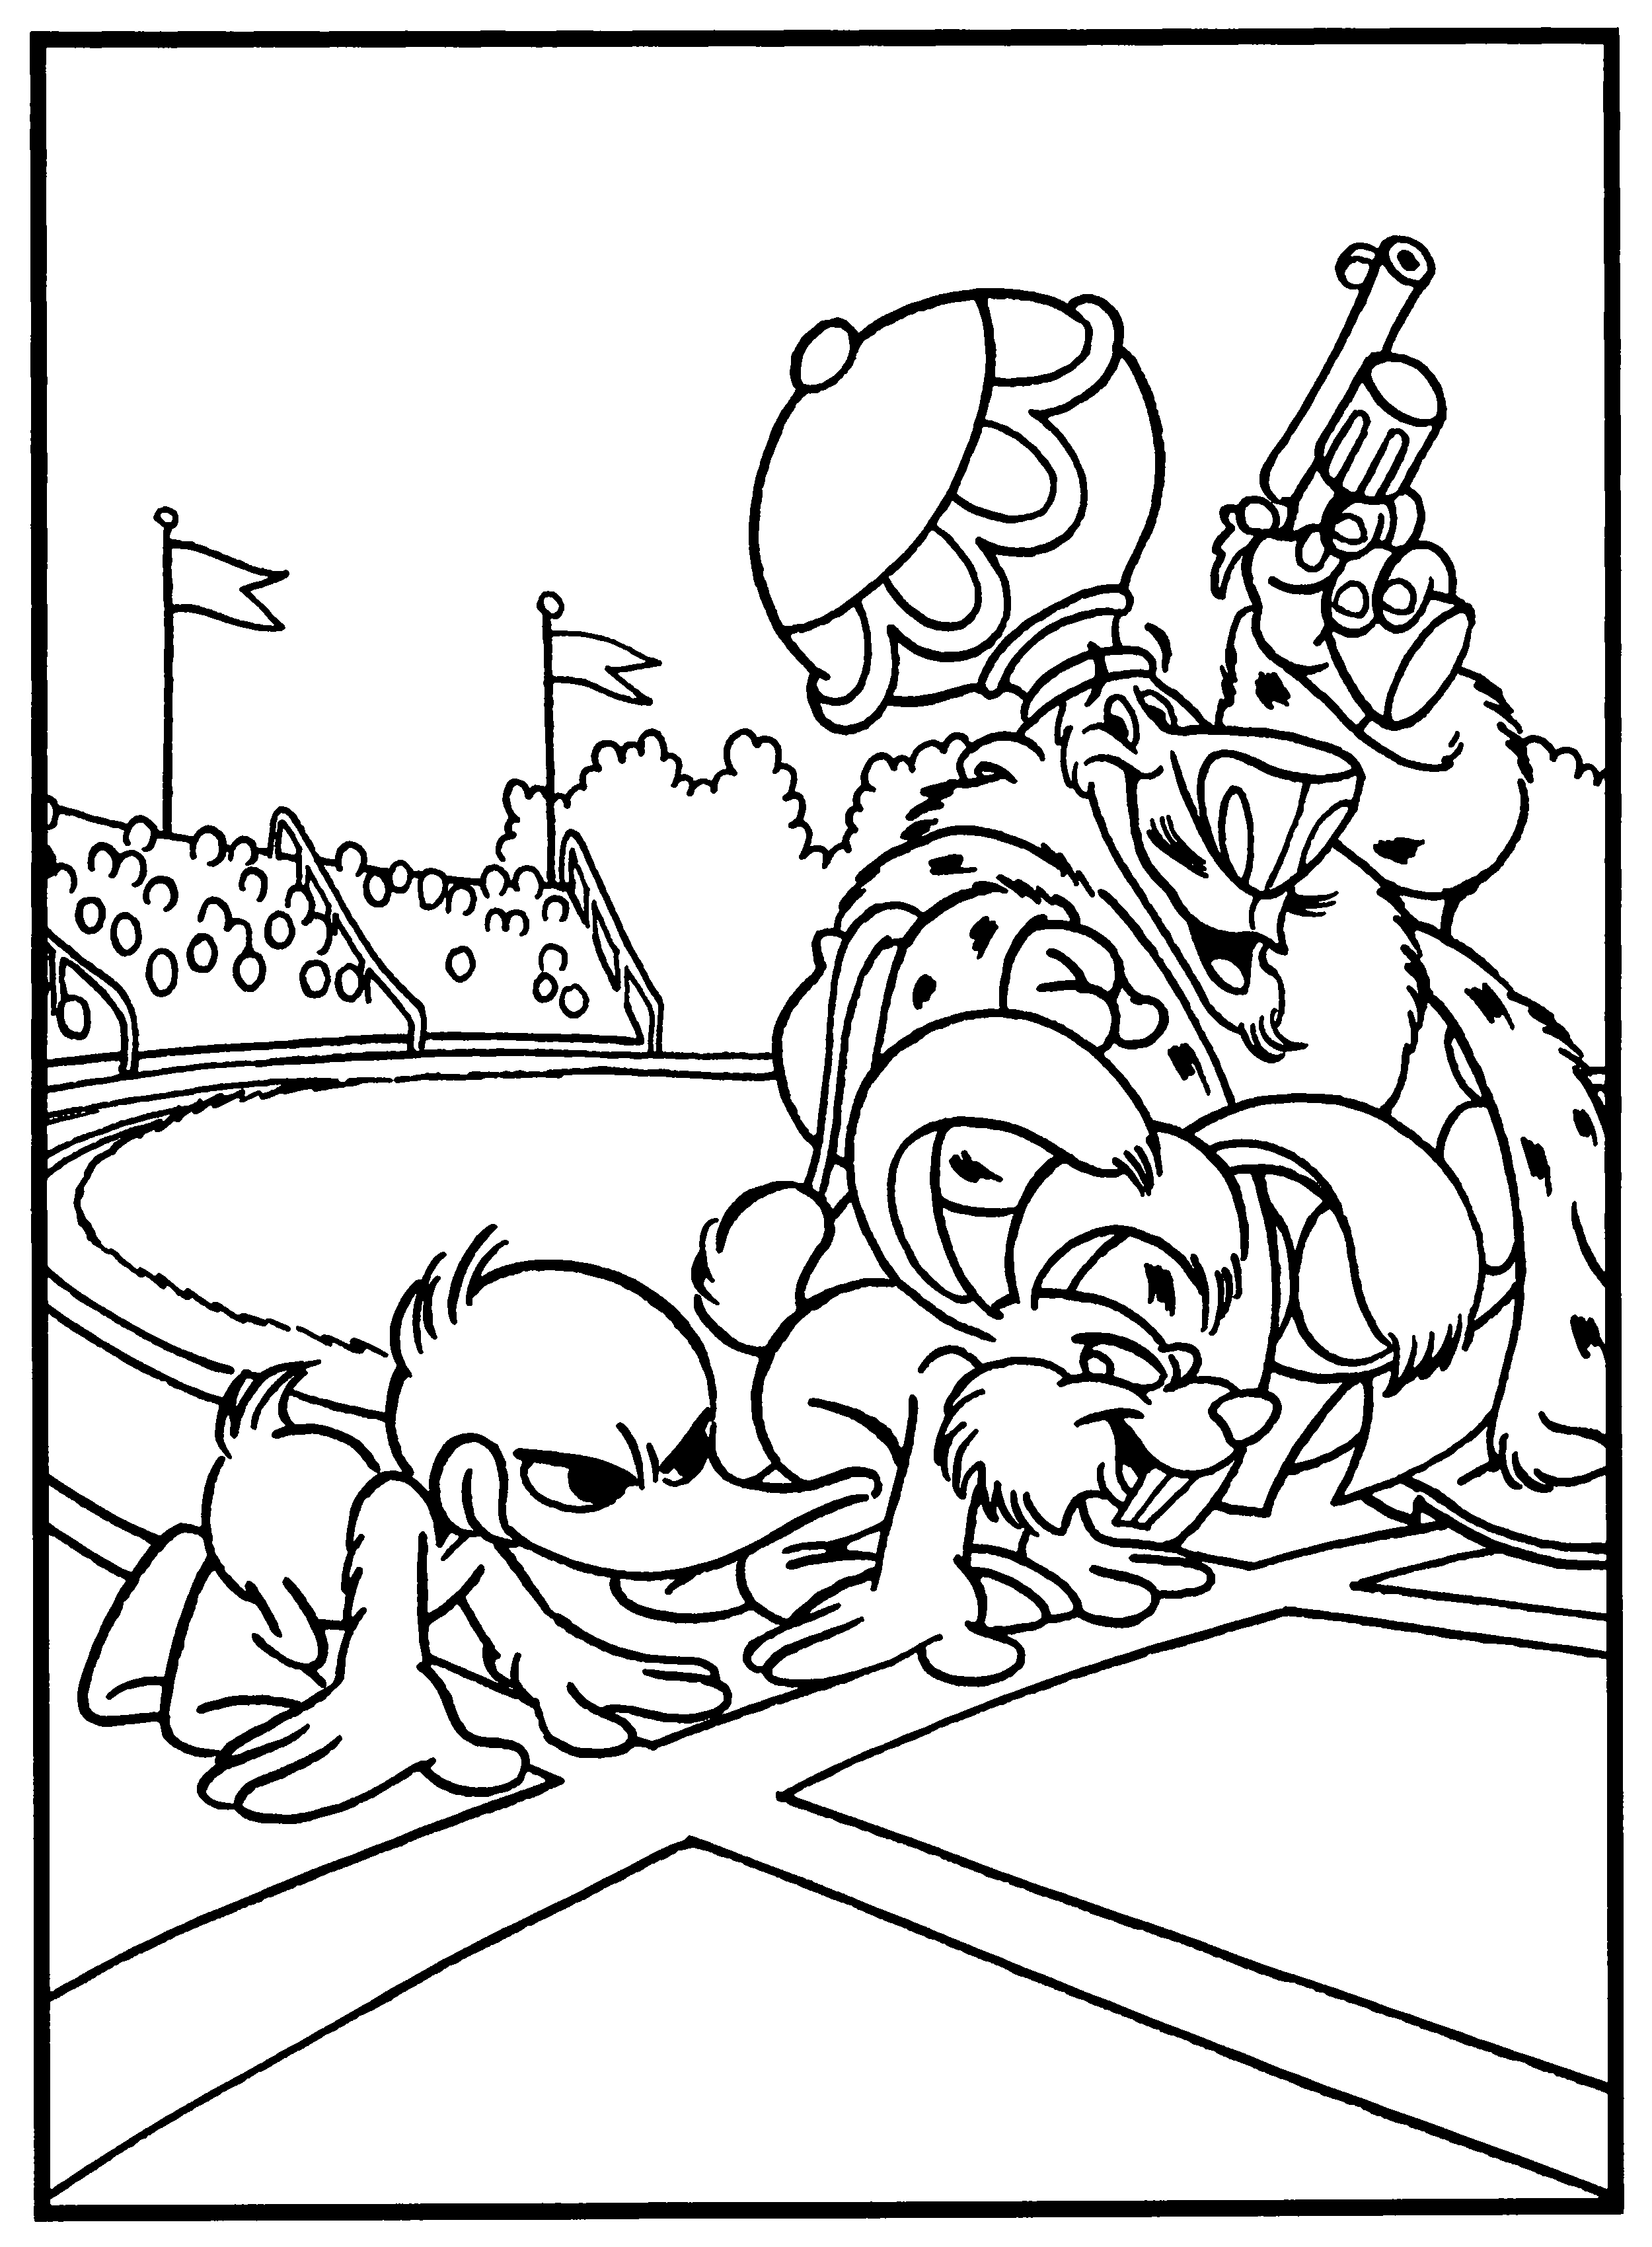 Alfred j kwak Coloring Pages